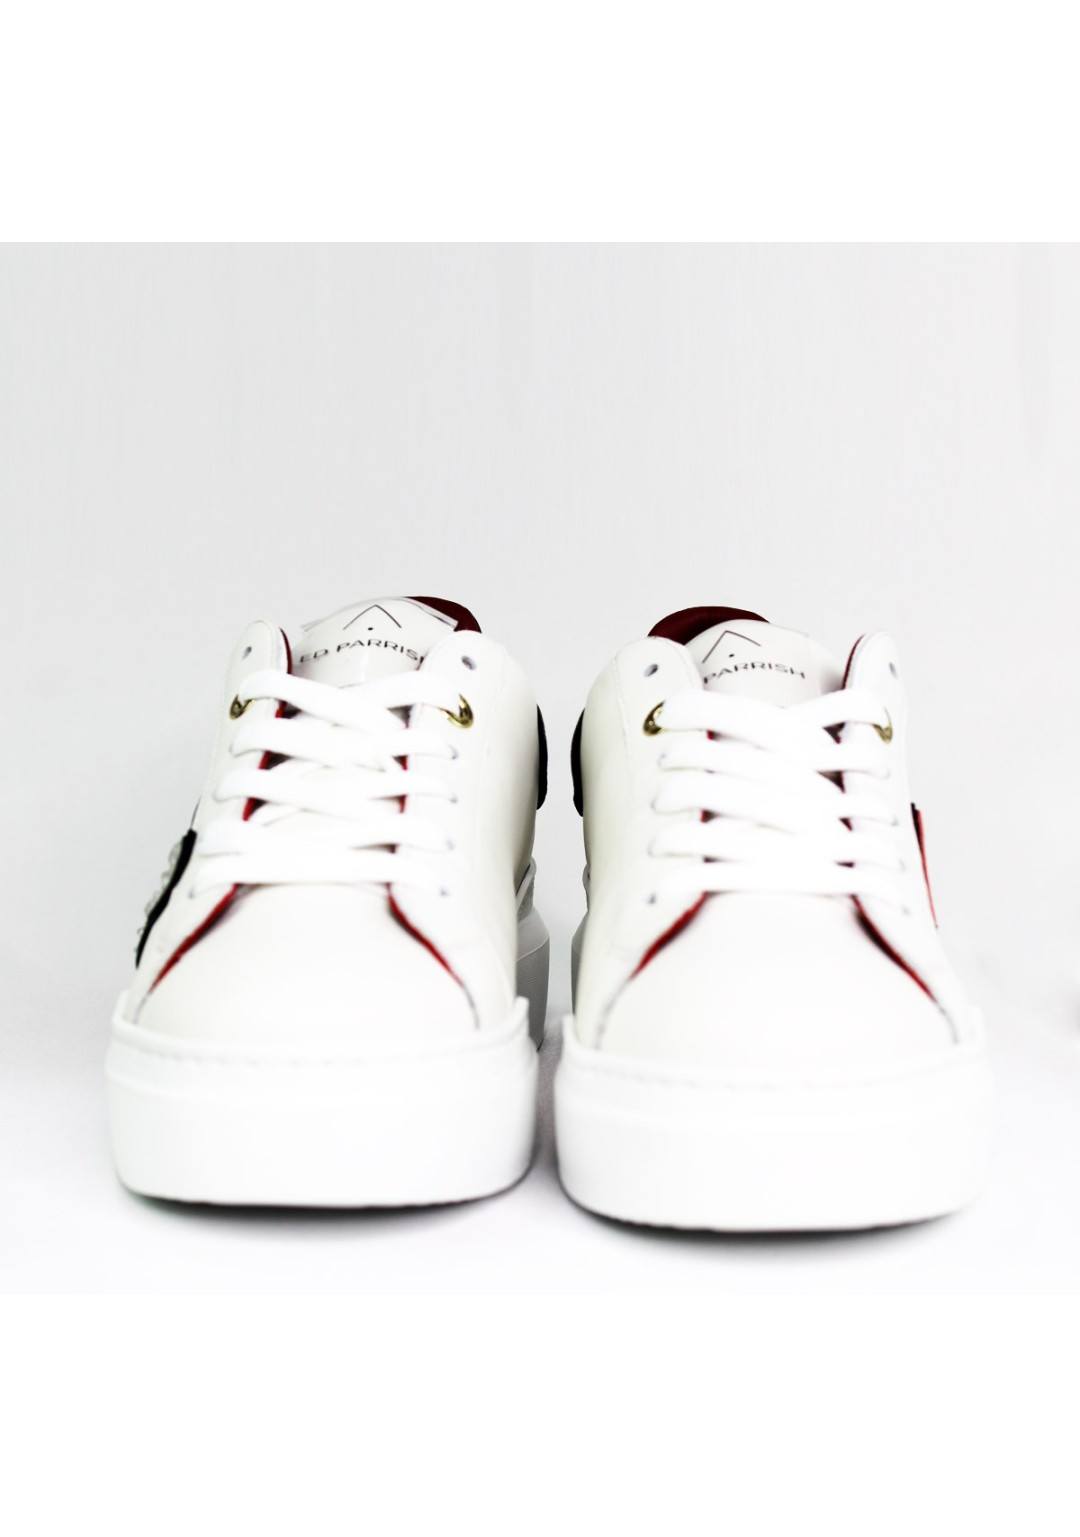 ED PARRISH Sneakers double face Donna